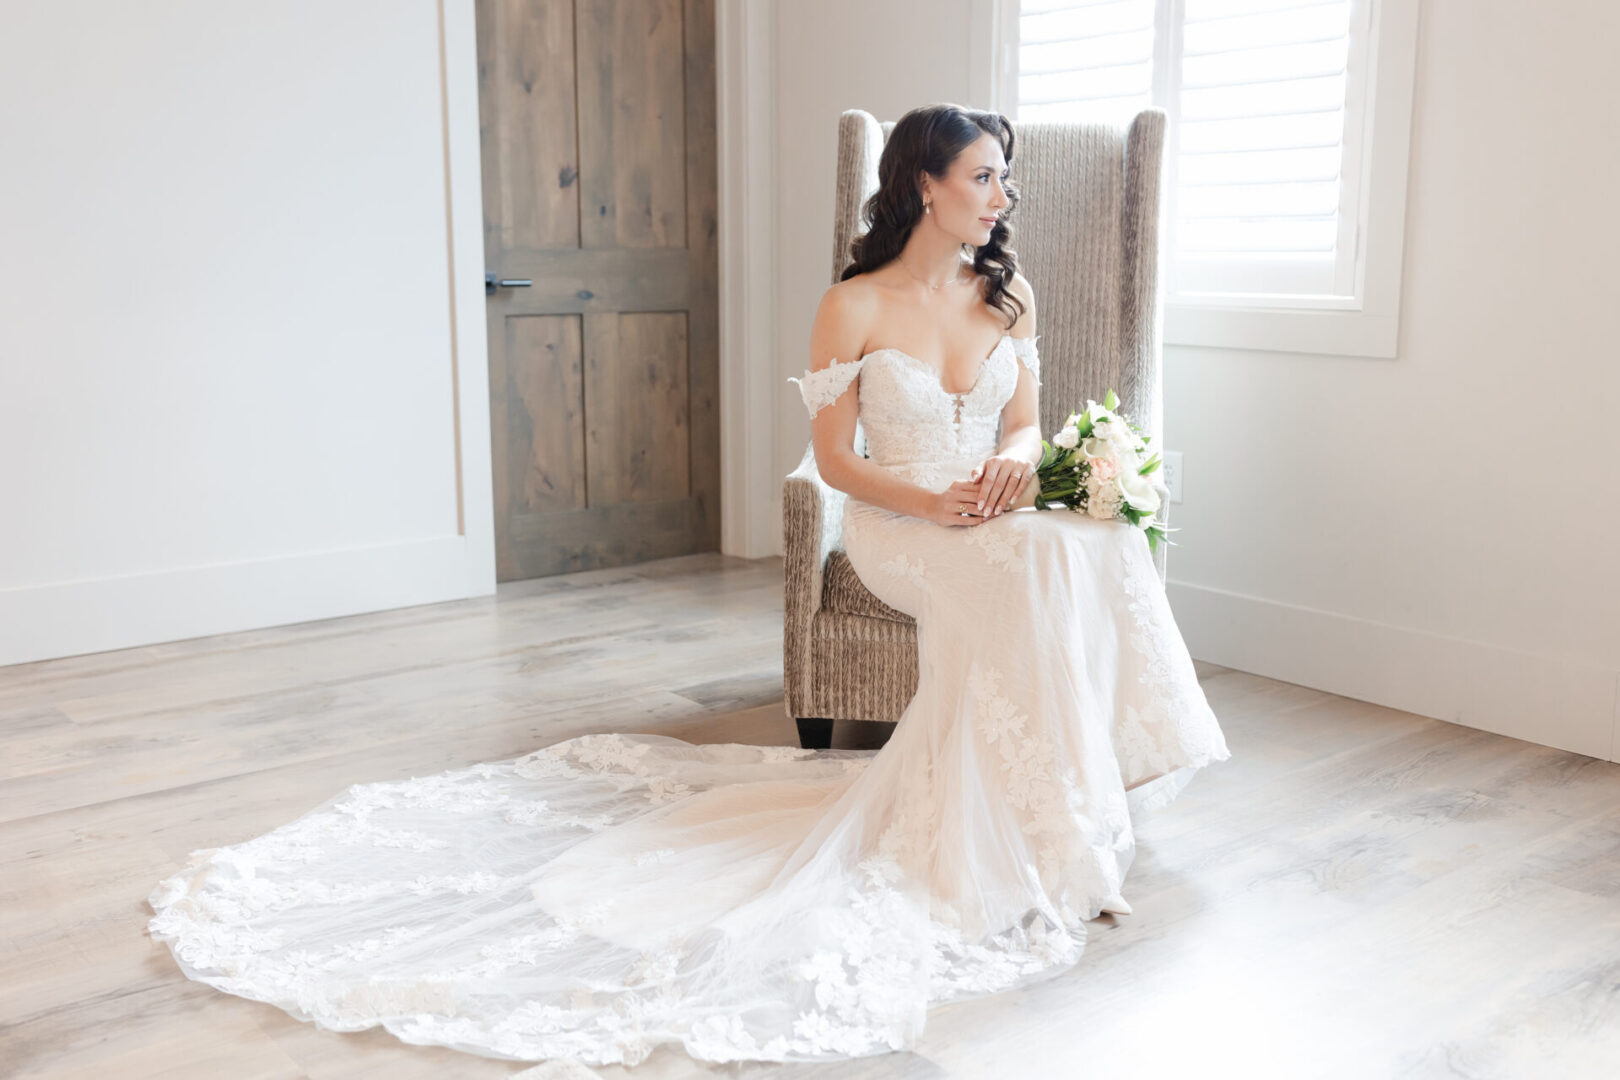 A bride sitting in her wedding dress on the floor